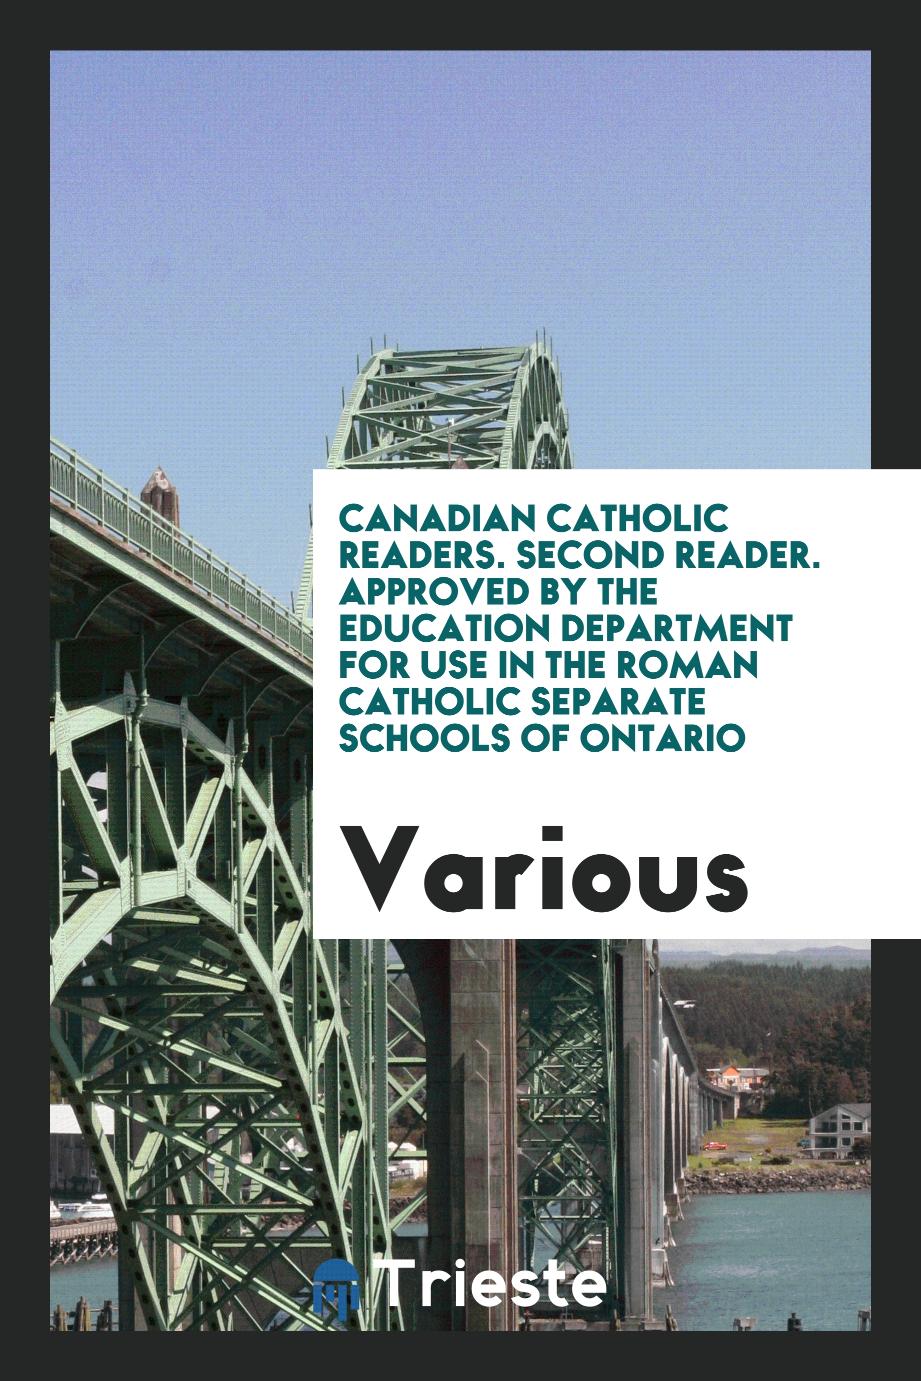 Canadian Catholic Readers. Second Reader. Approved by the Education Department for Use in the Roman Catholic Separate Schools of Ontario